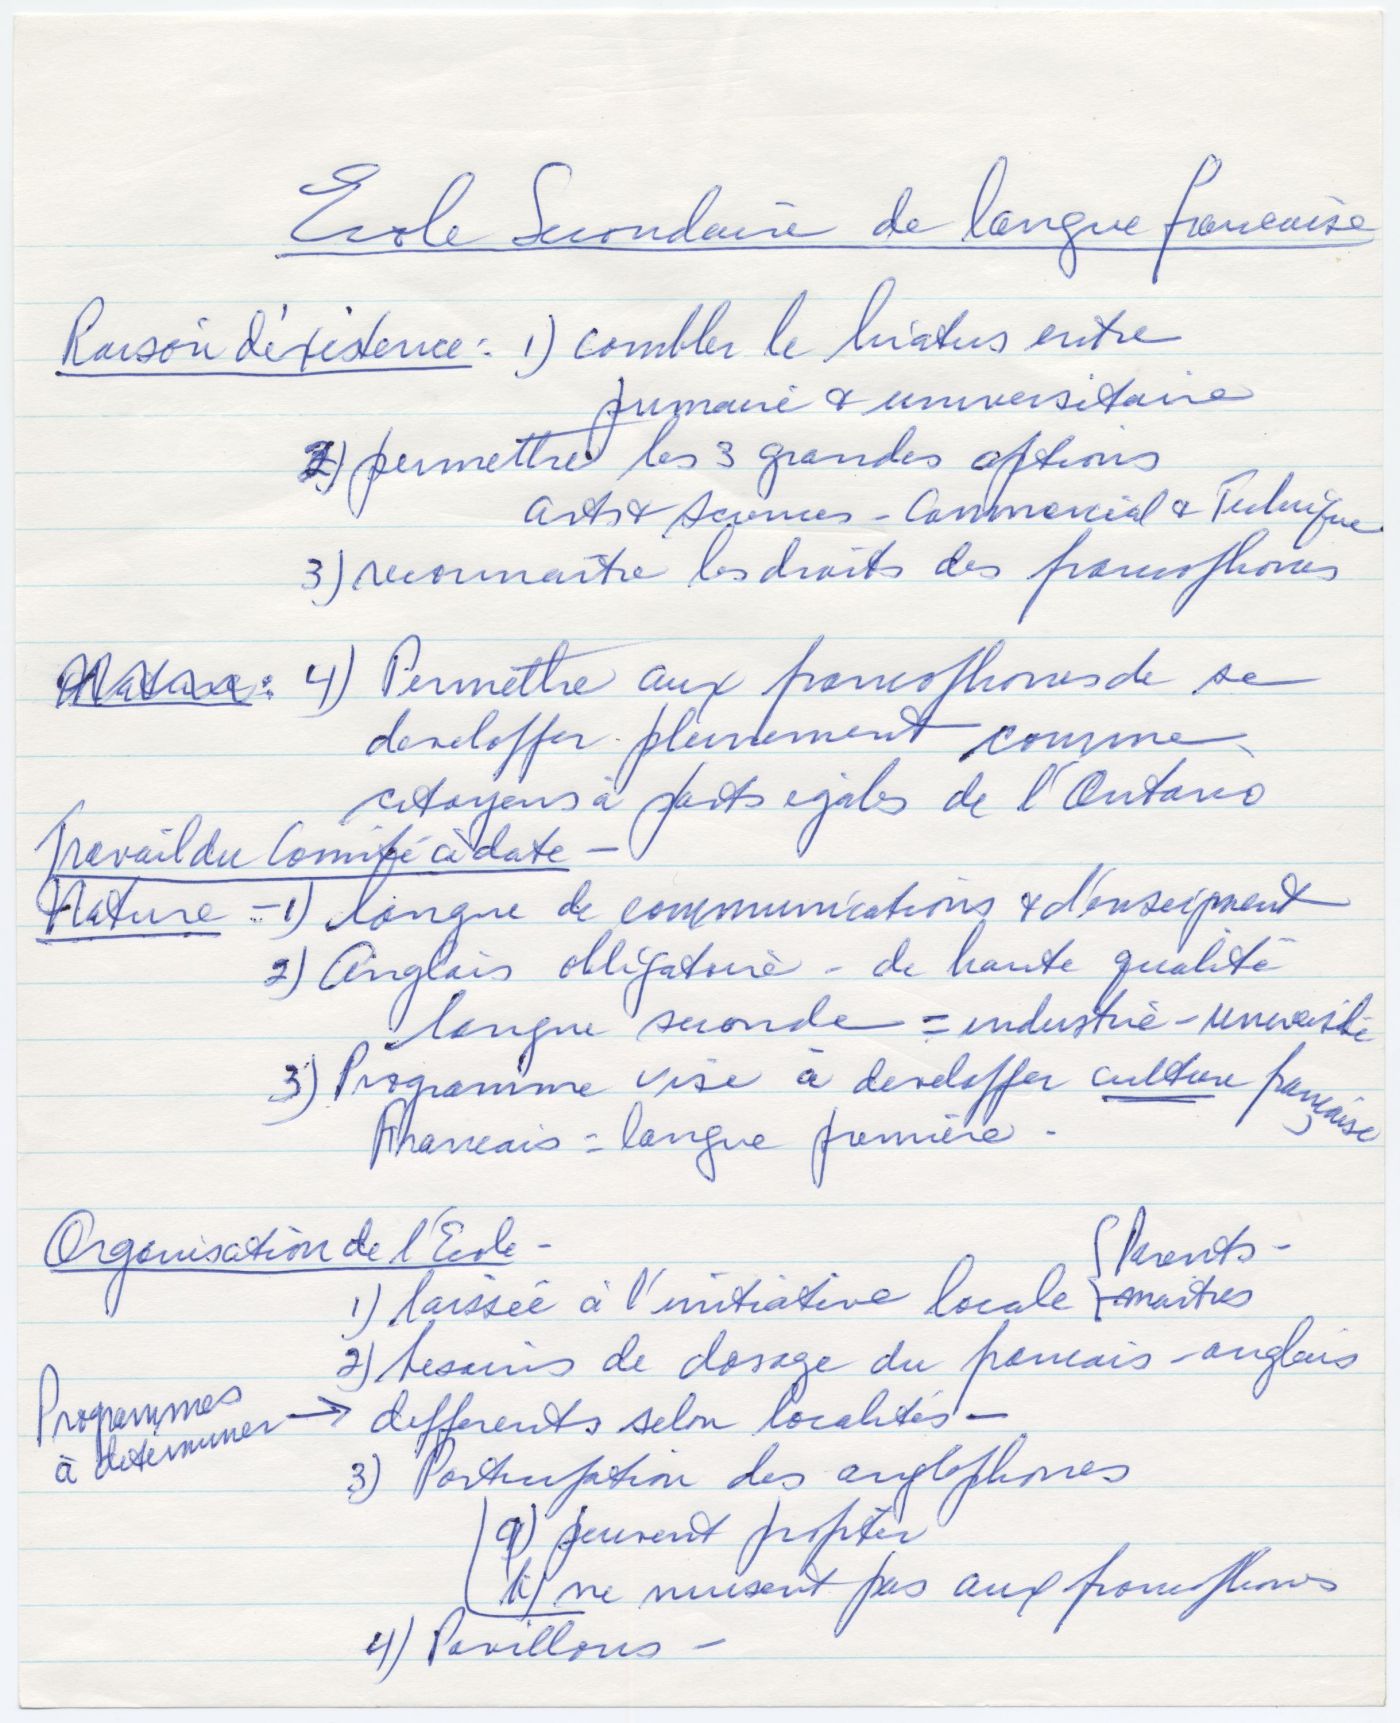 Handwritten French text in blue ink. A numbered list of recommendations, under three headings: raisons d'existence (reason for being), nature (nature) et organisation de l'école (organization of schools).